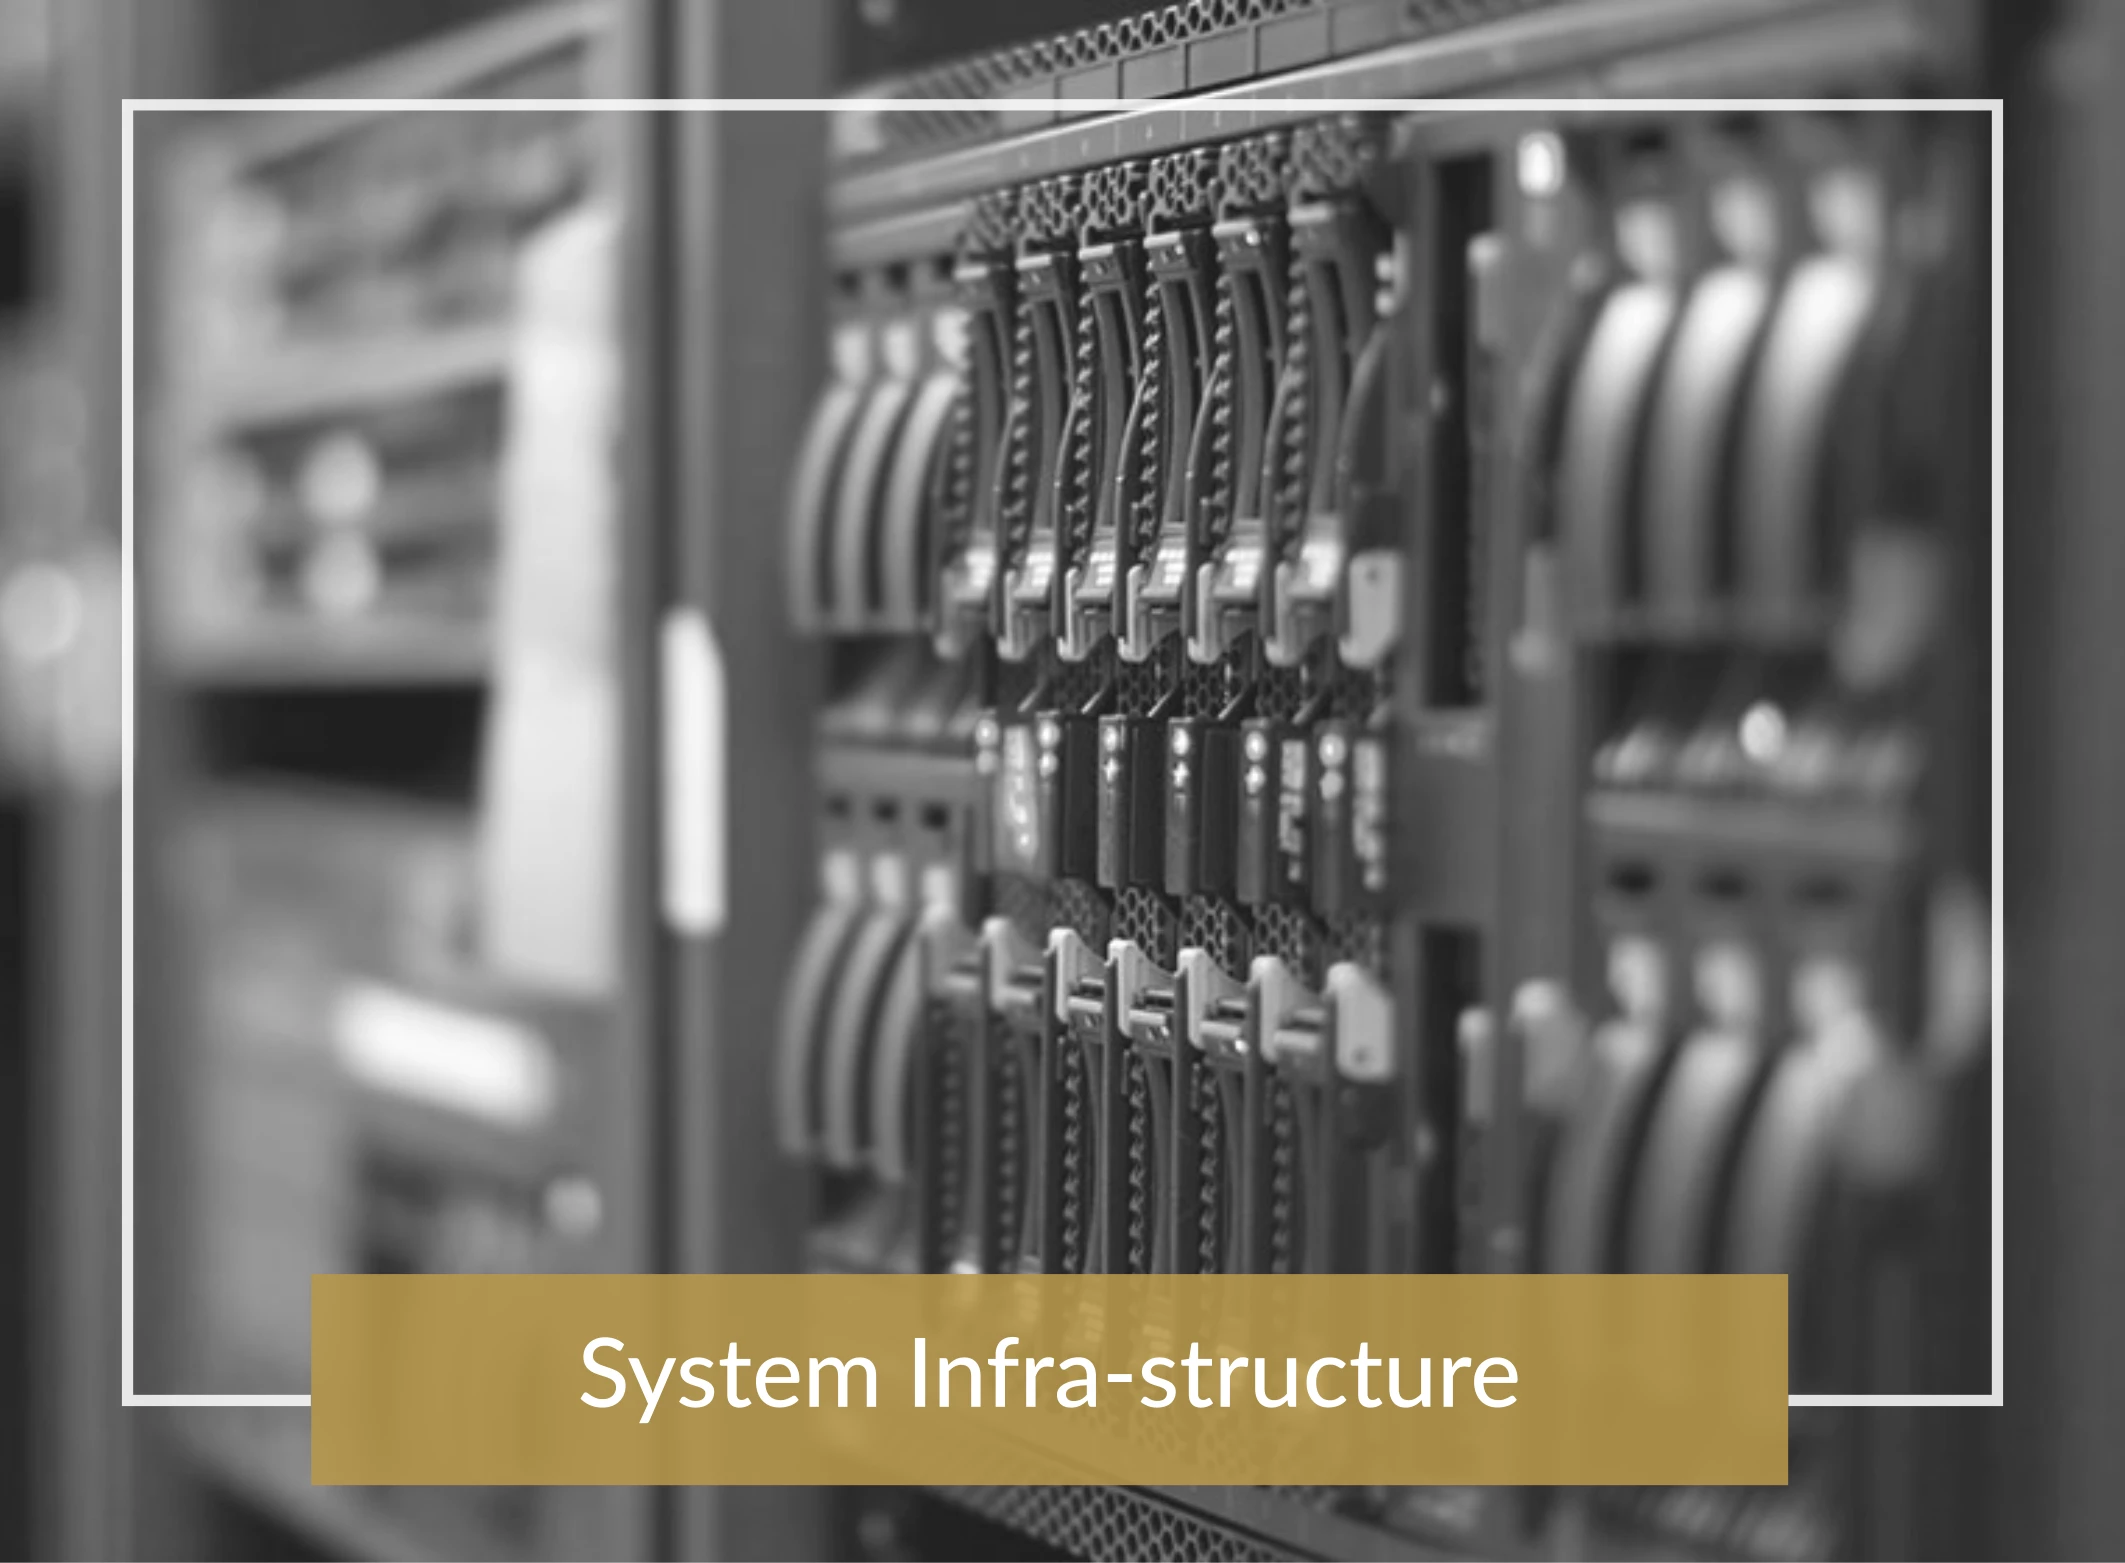 System Infra-Structure